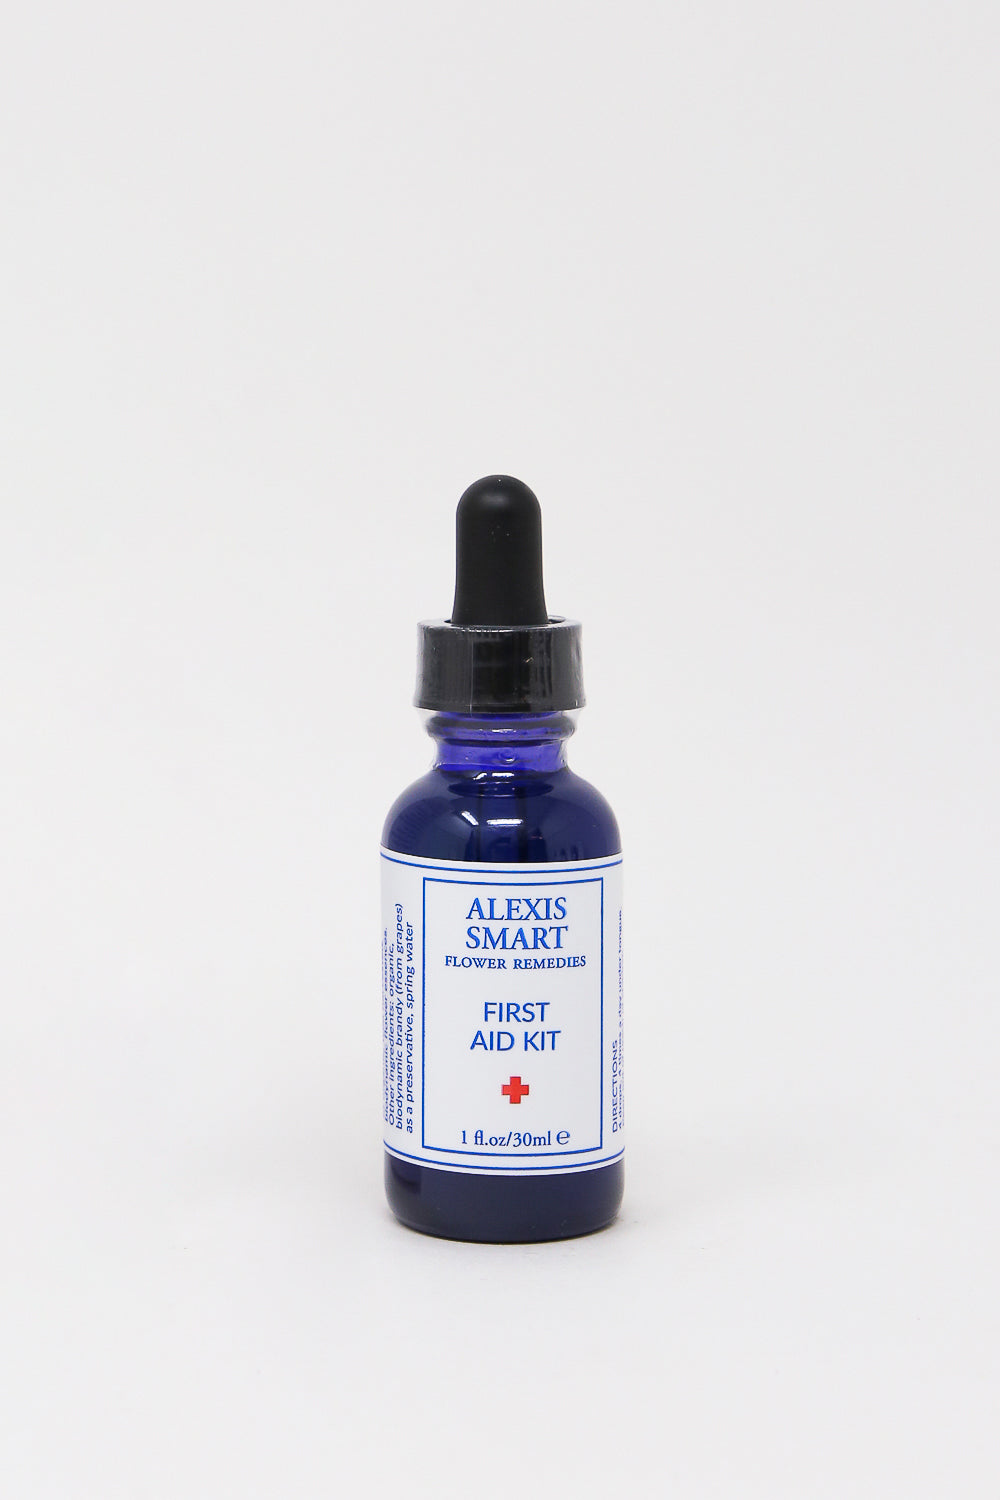 Alexis Smart - Flower Remedies - First Aid Kit